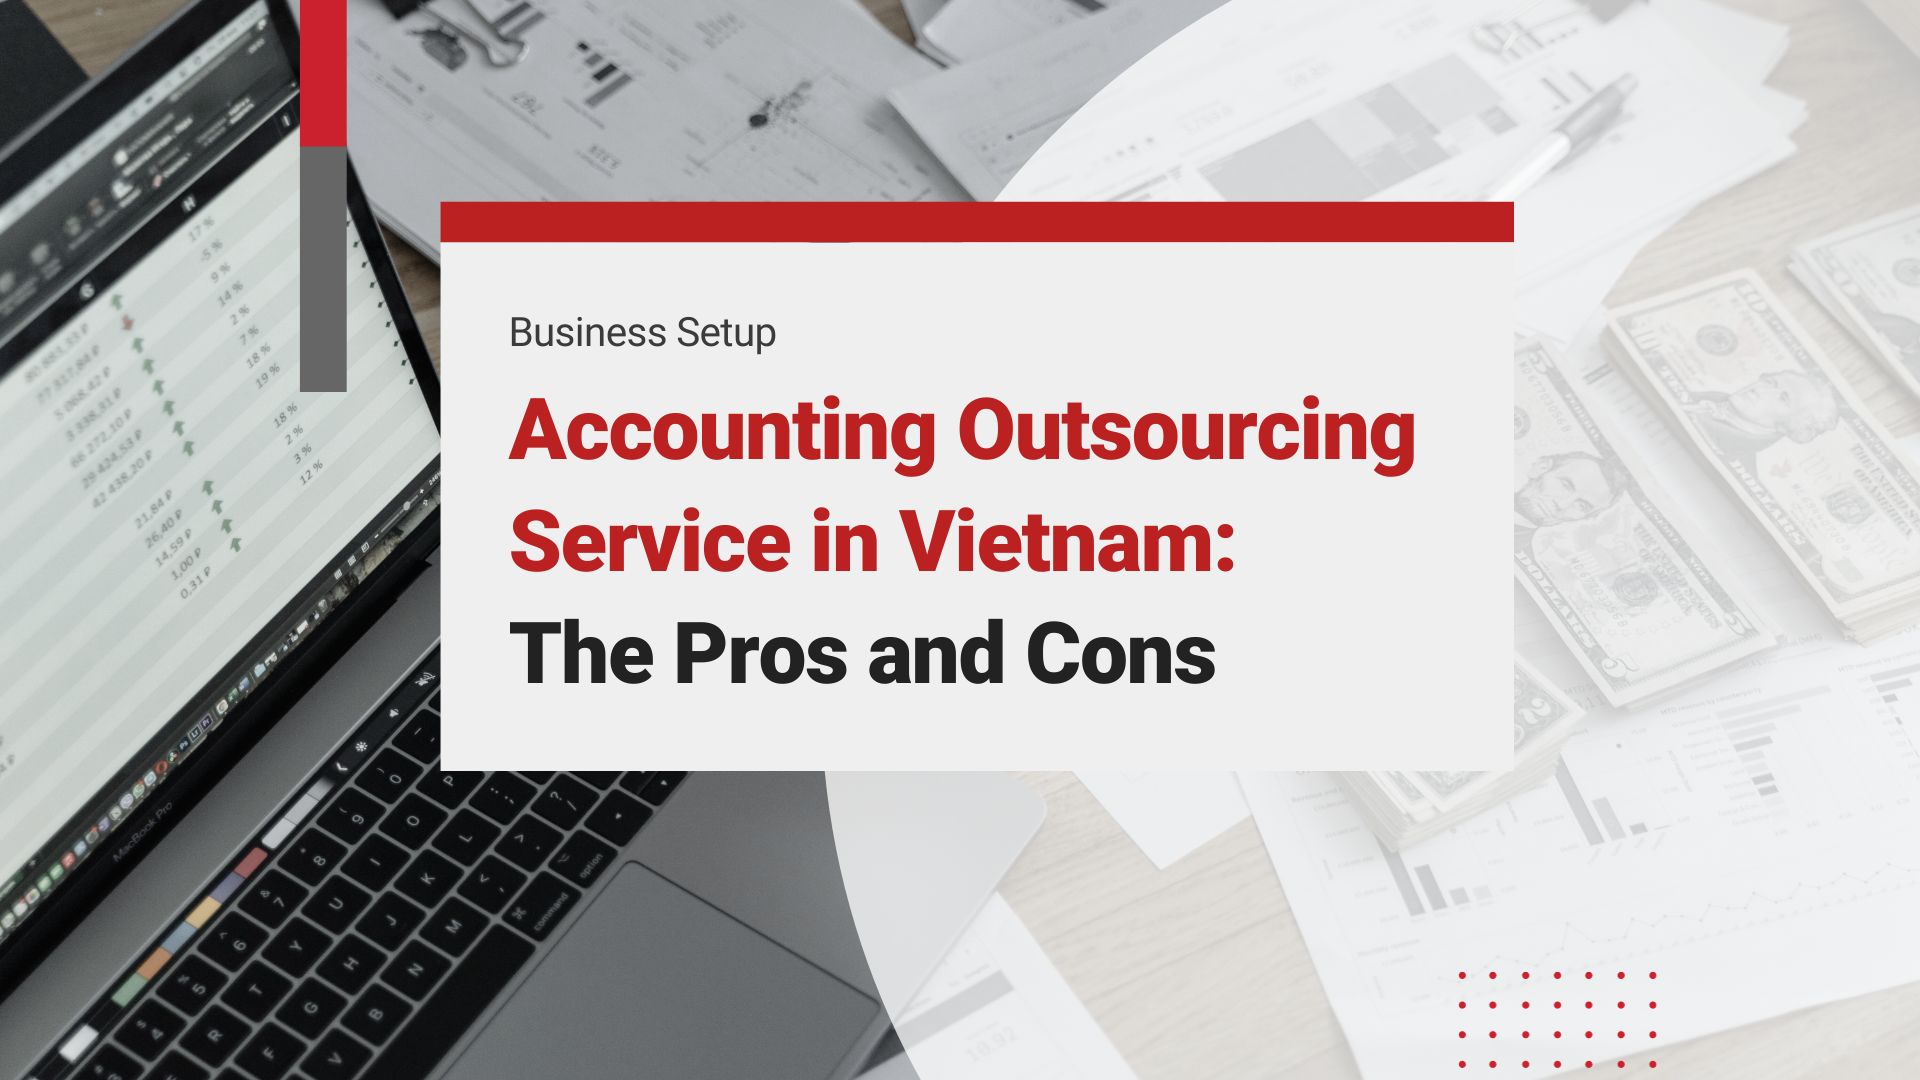 Accounting Outsourcing Services in Vietnam: The Pros and Cons